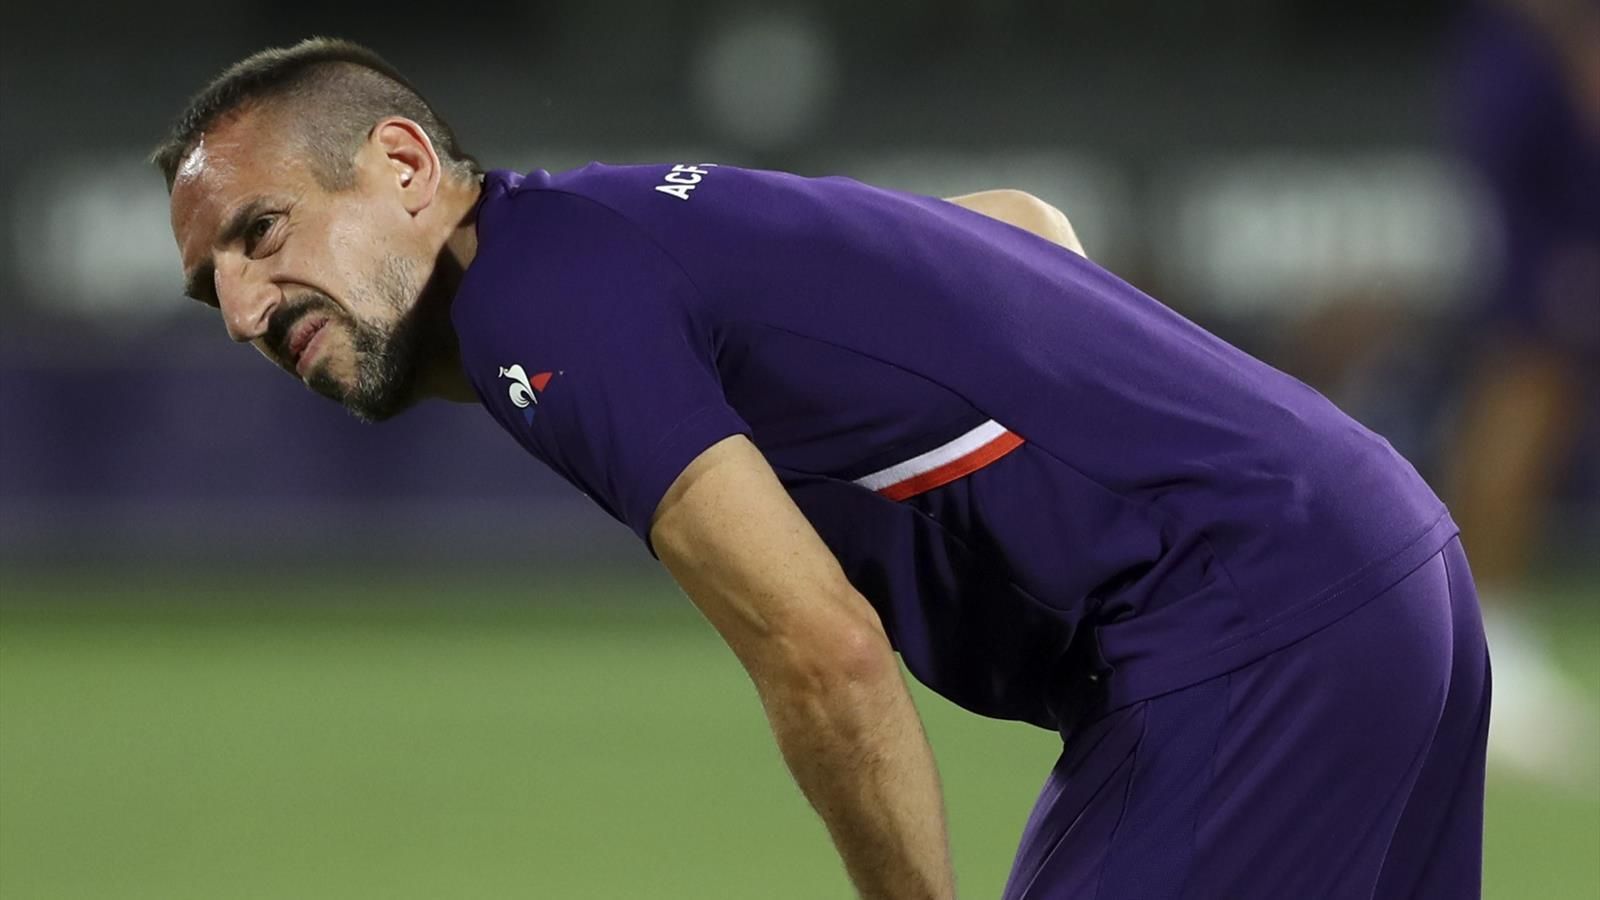 Iachini Discusses How Fiorentina Returned to Football after Being the Worst-hit by Coronavirus